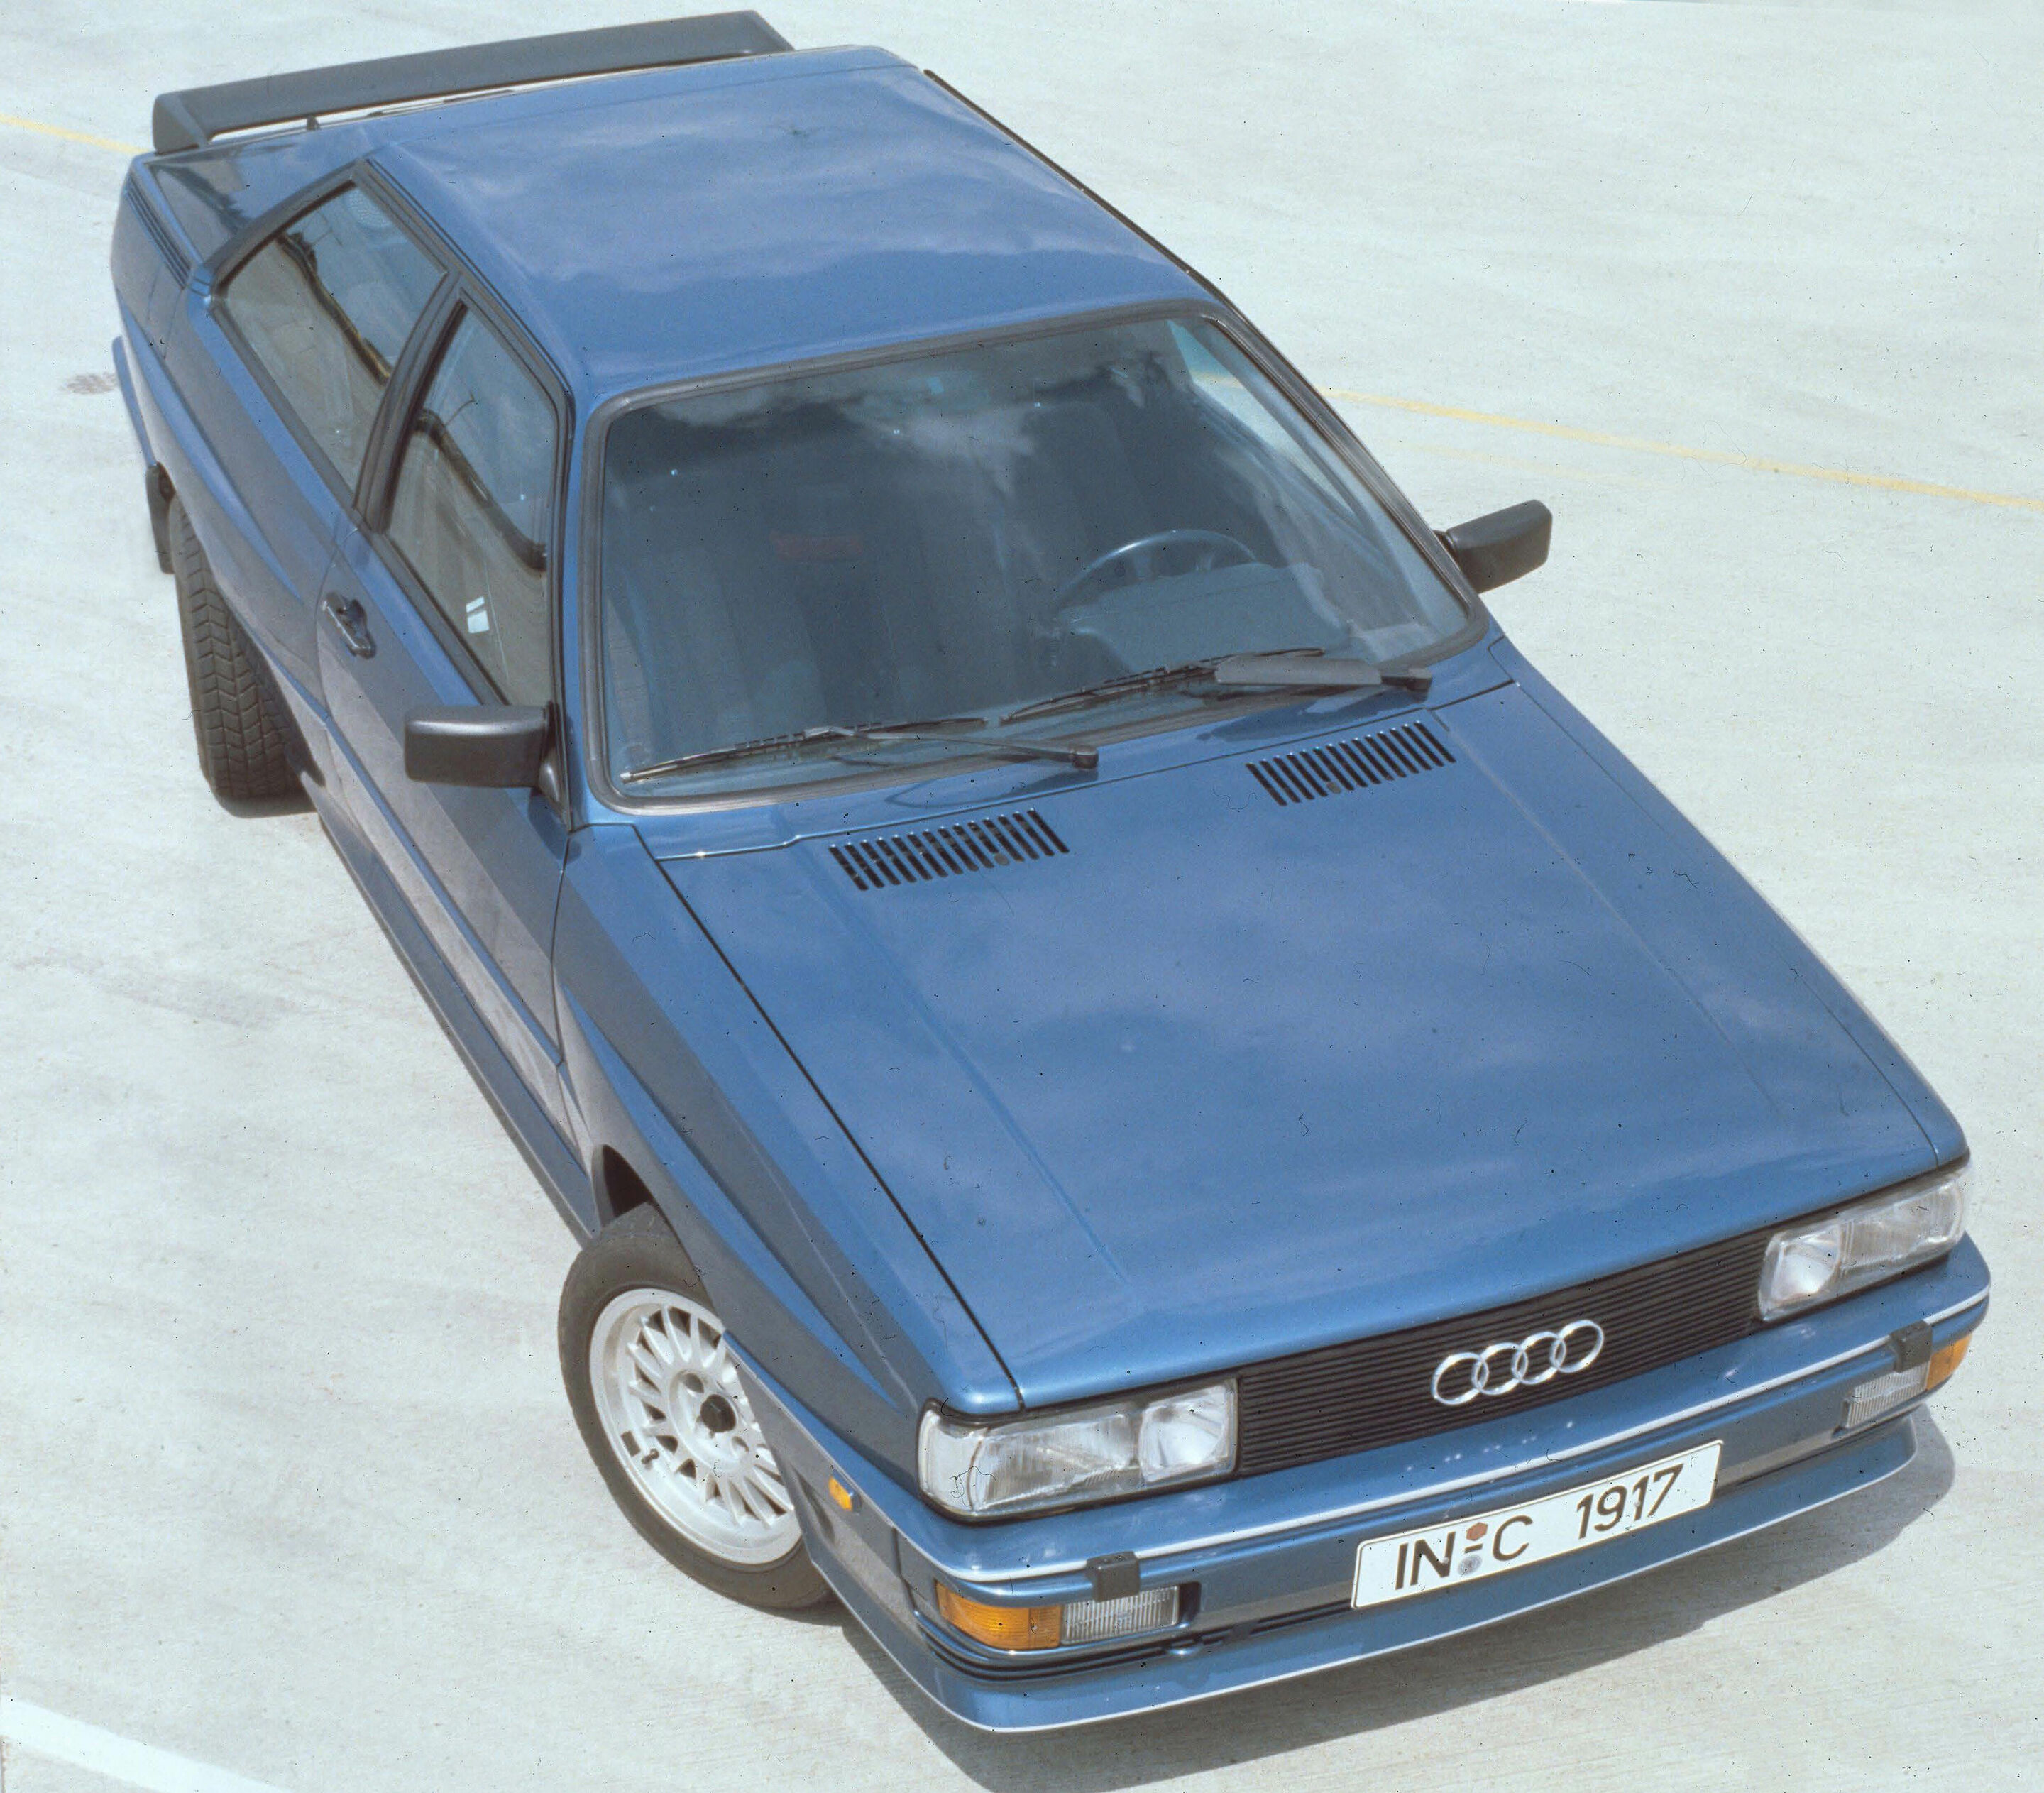 “I like it” – and the winner is: Audi quattro